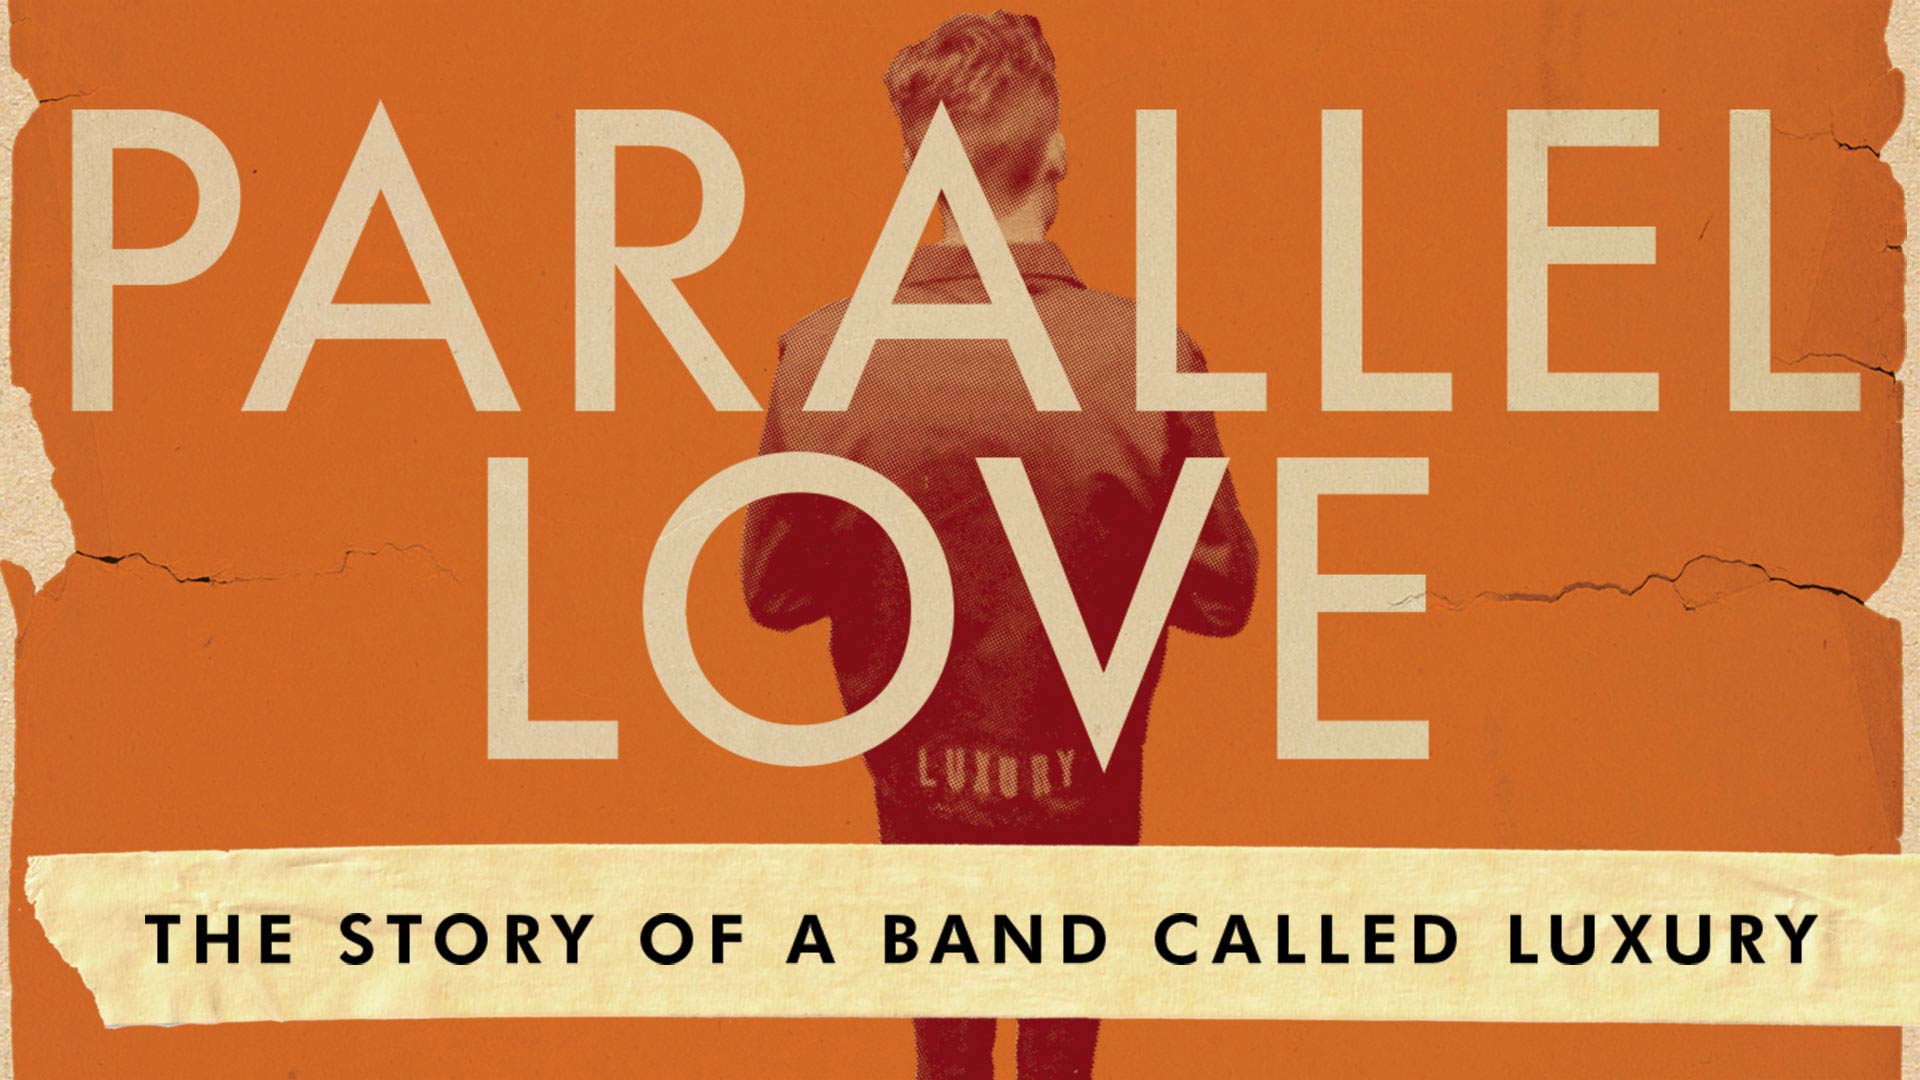 Parallel Love: The Story Of A Band Called Luxury